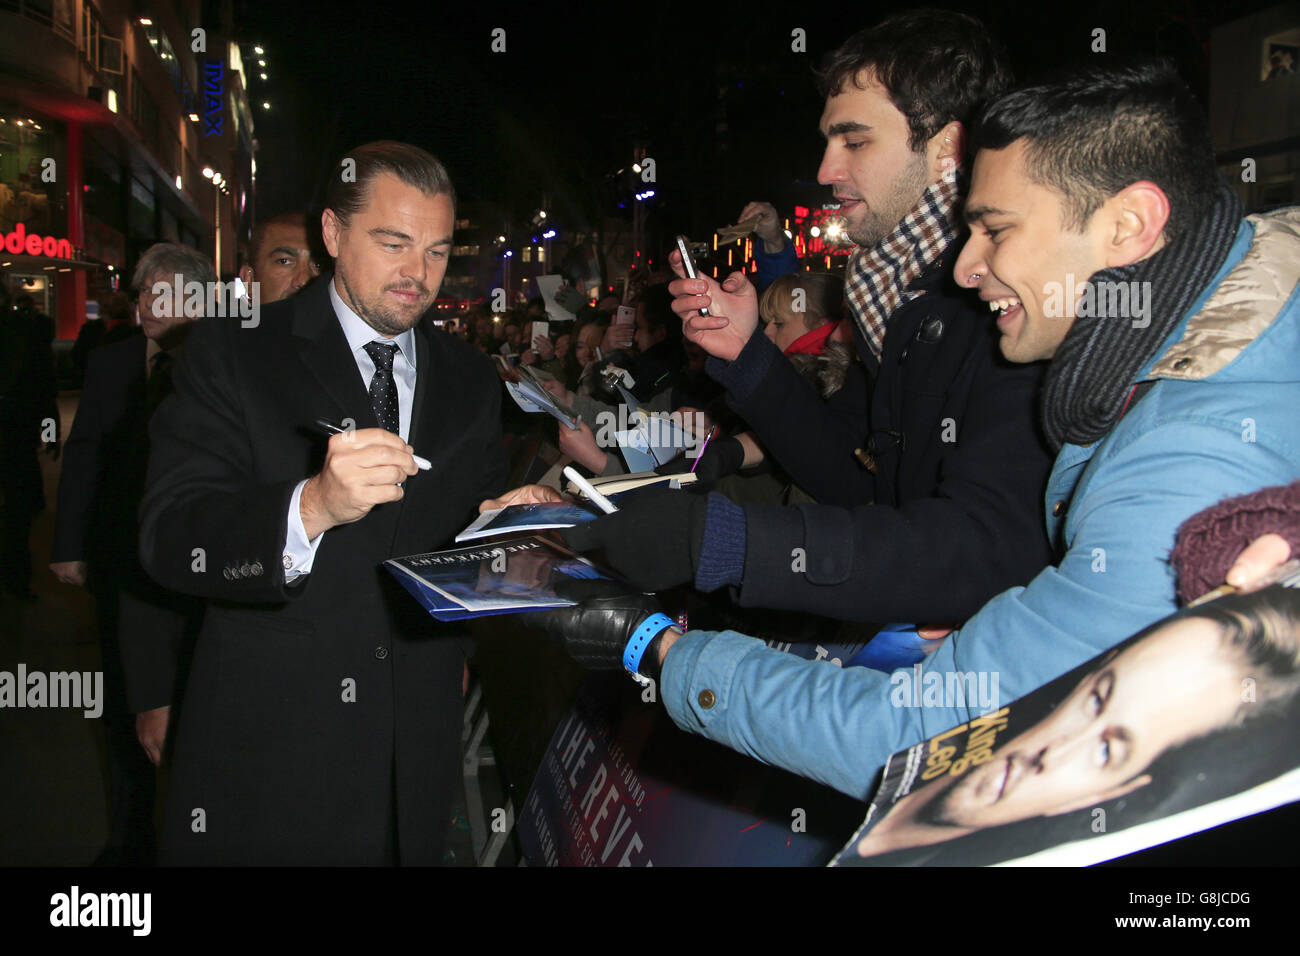 Leonardo DiCaprio signs autographs as he arrives for The Revenant premiere, held at Empire Leicester Square, London. PRESS ASSOCIATION Photo. Picture date: Thursday January 14, 2016. See PA story SHOWBIZ Revenant. Photo credit should read: Jonathan Brady/PA Wire Stock Photo